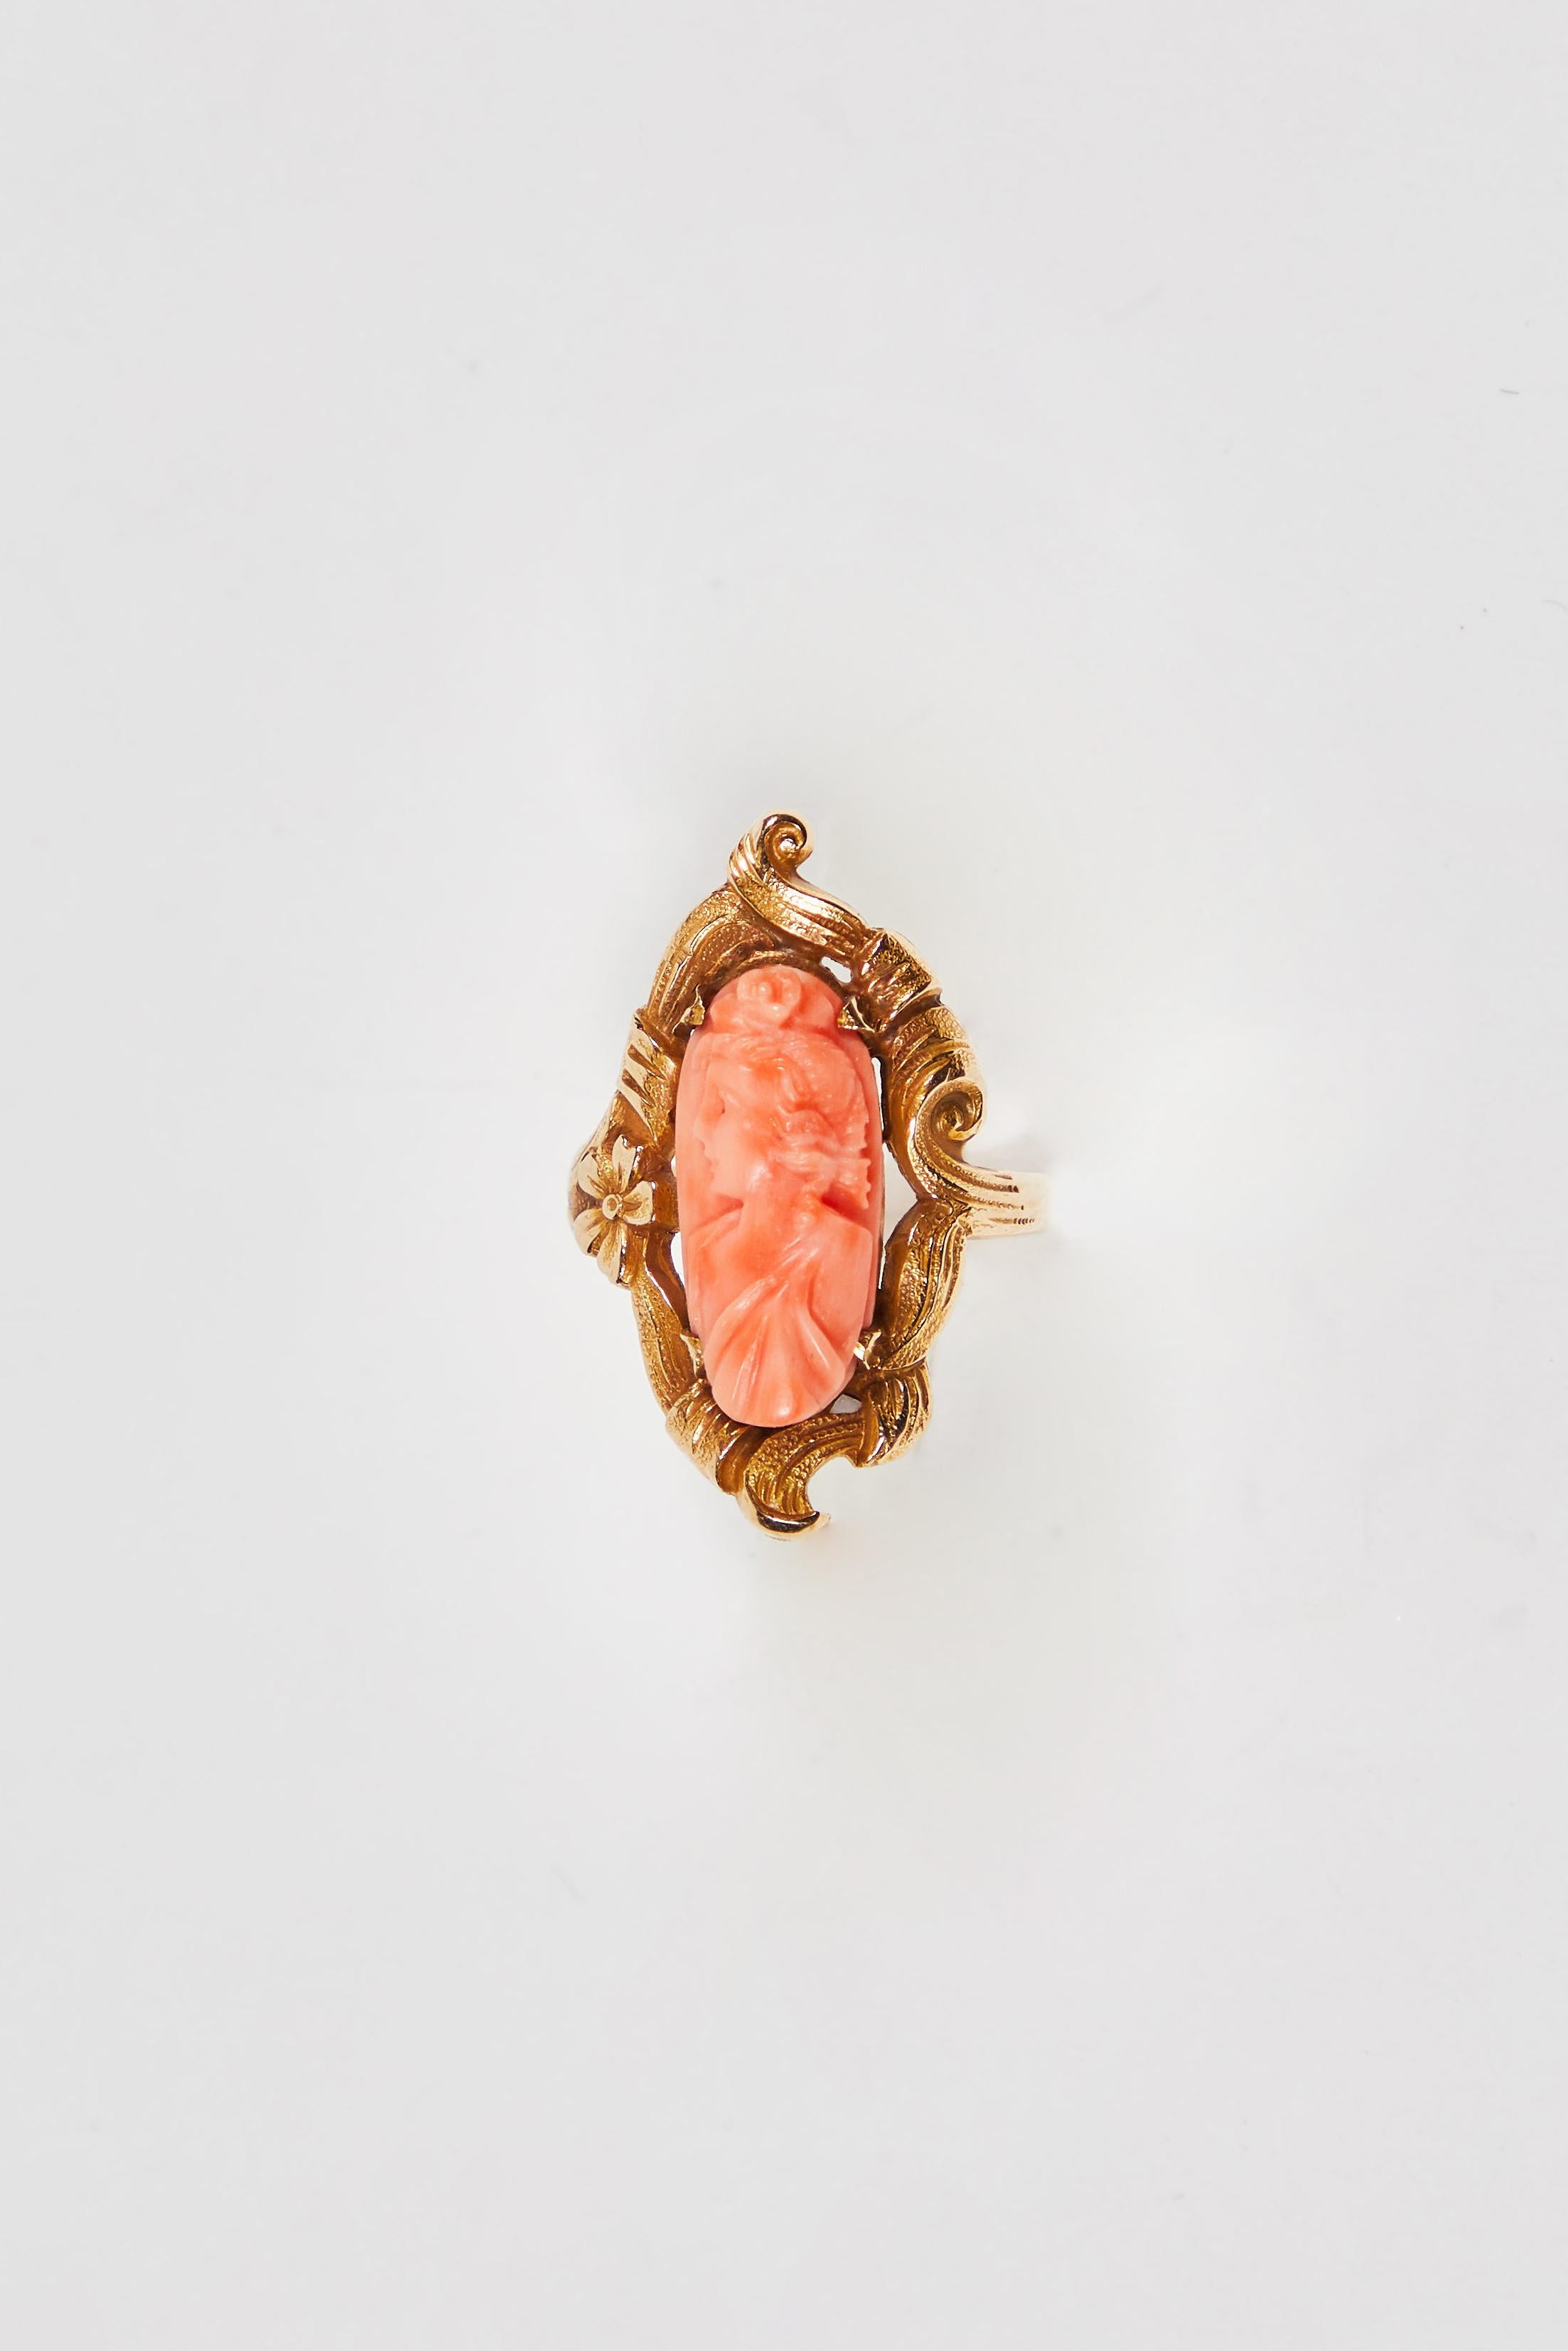 Antique Carved Angel Skin Coral Cameo, Cocktail Ring with Decorative Setting 1